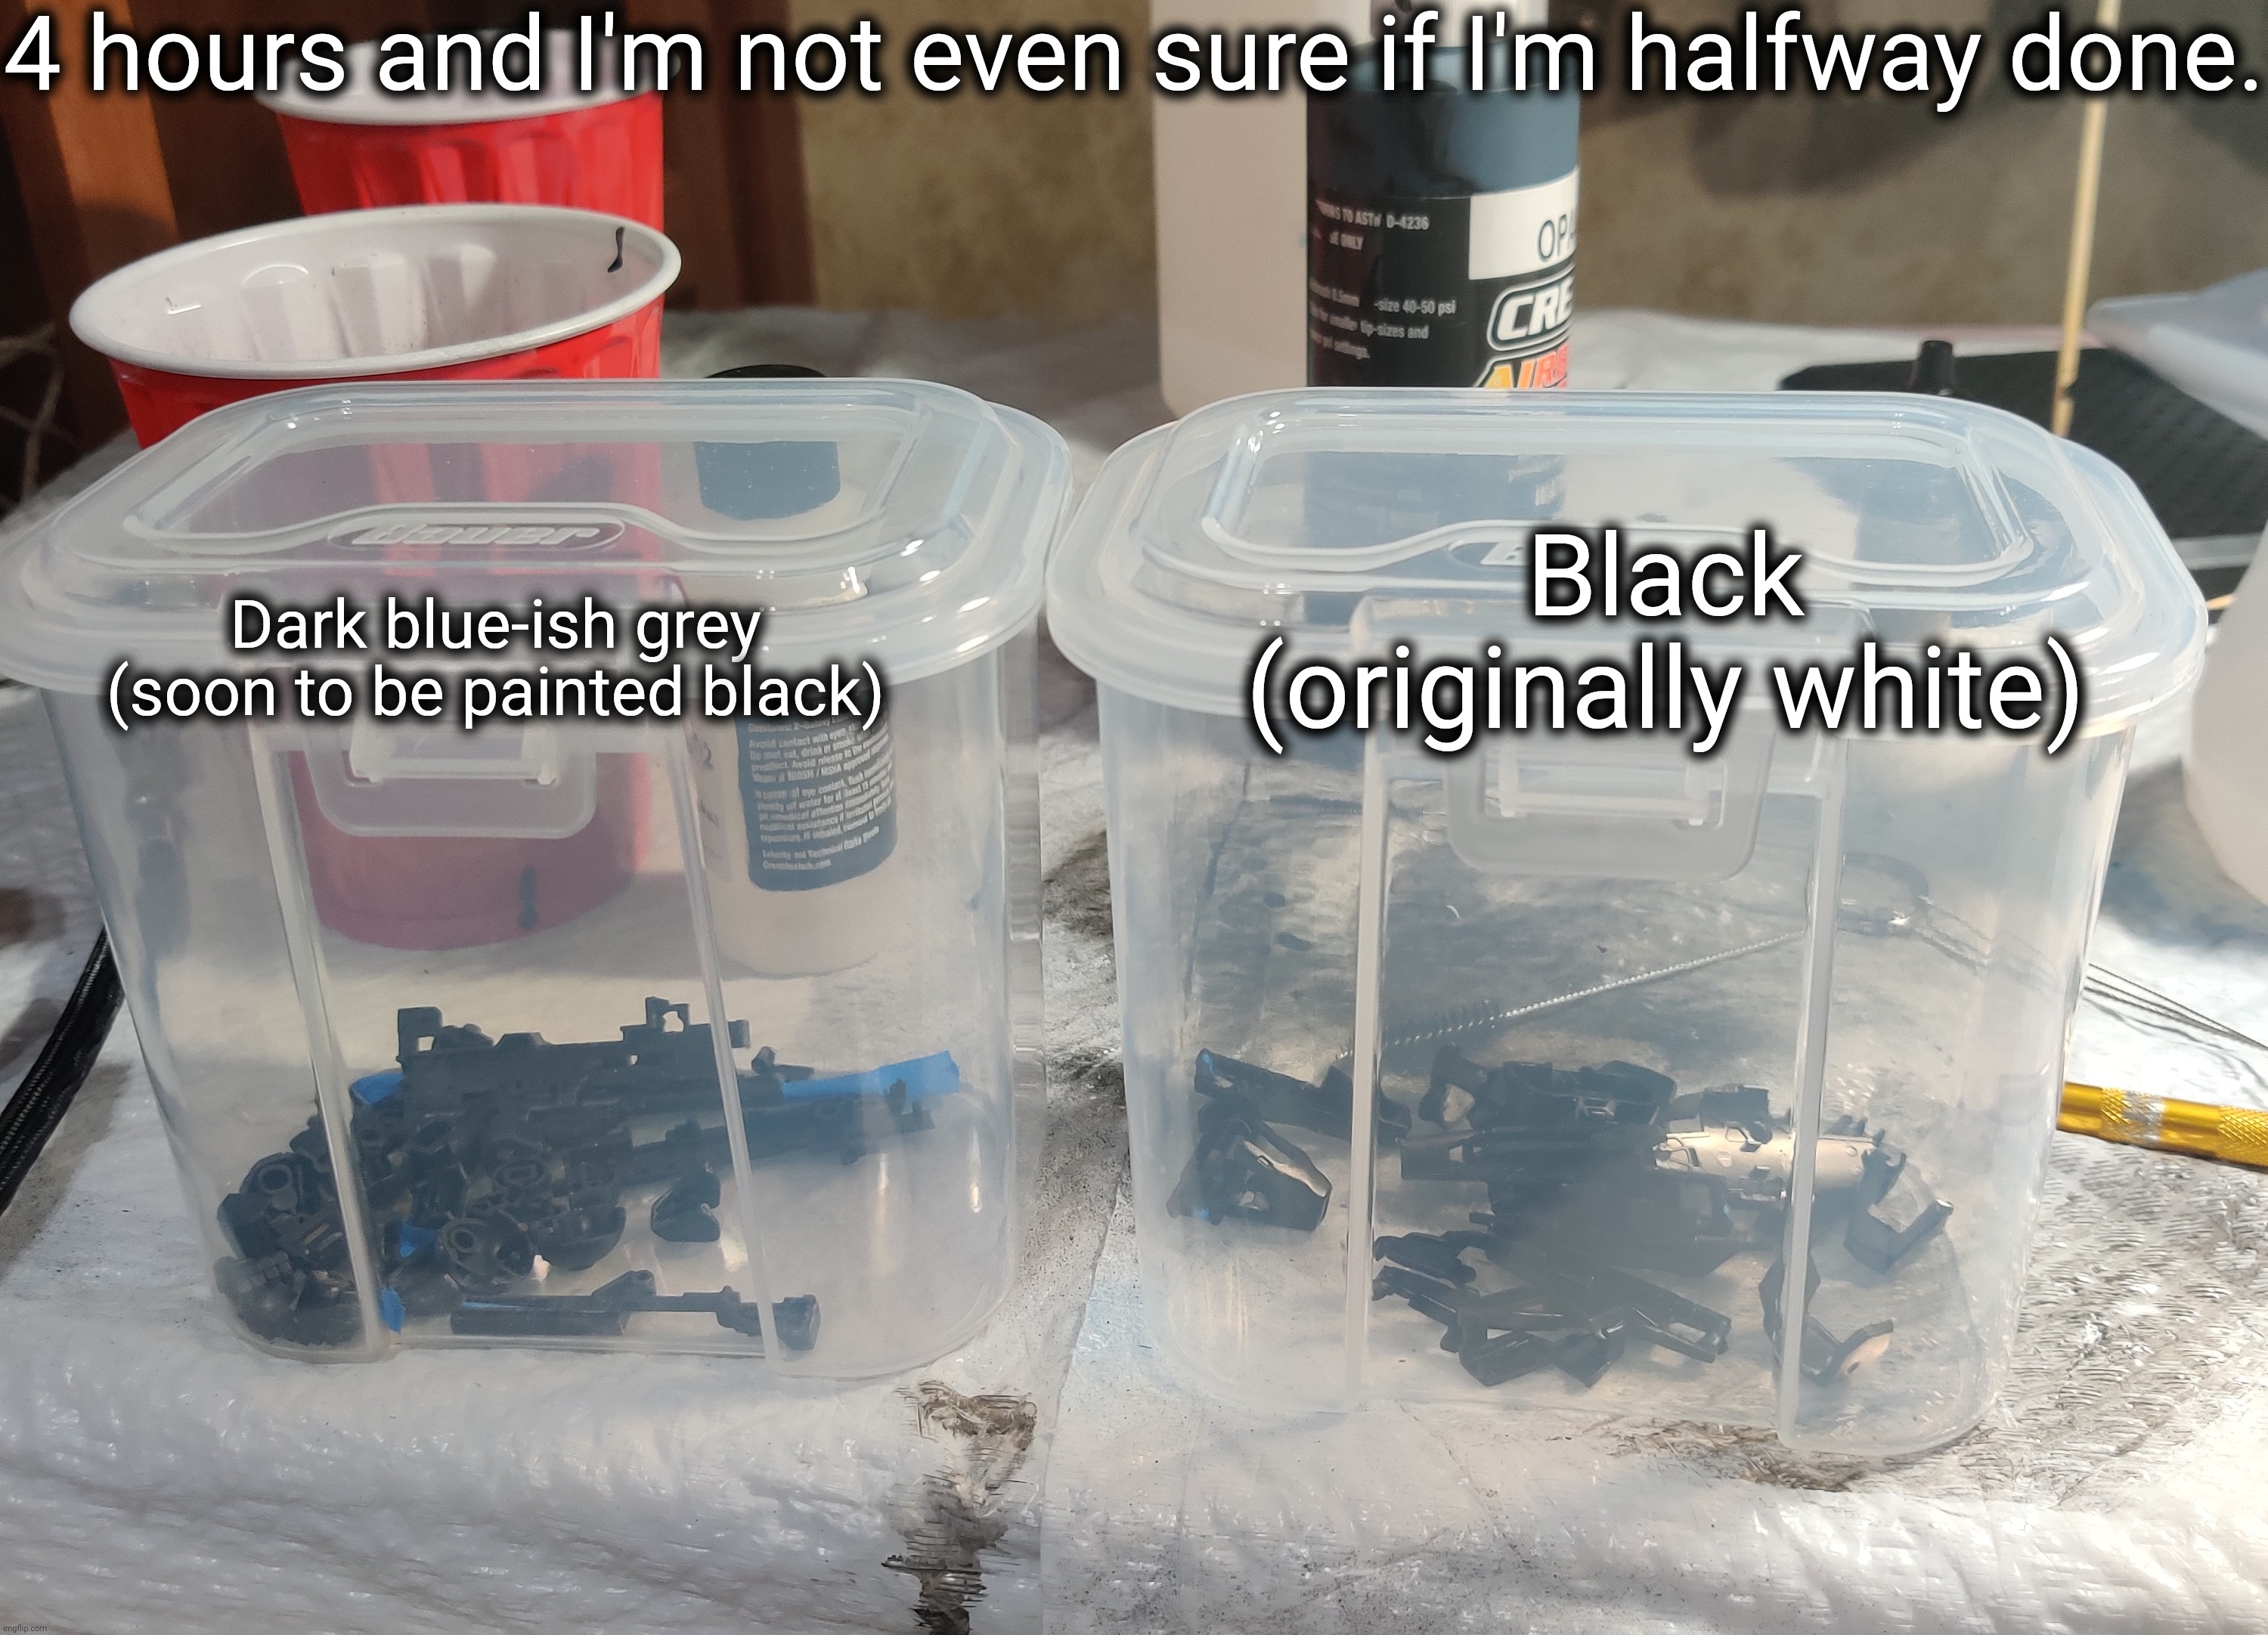 I had a bunch of issues with the paint but about halfway through I figured it out. These were supposed to be the easy ones btw | 4 hours and I'm not even sure if I'm halfway done. Black (originally white); Dark blue-ish grey (soon to be painted black) | made w/ Imgflip meme maker